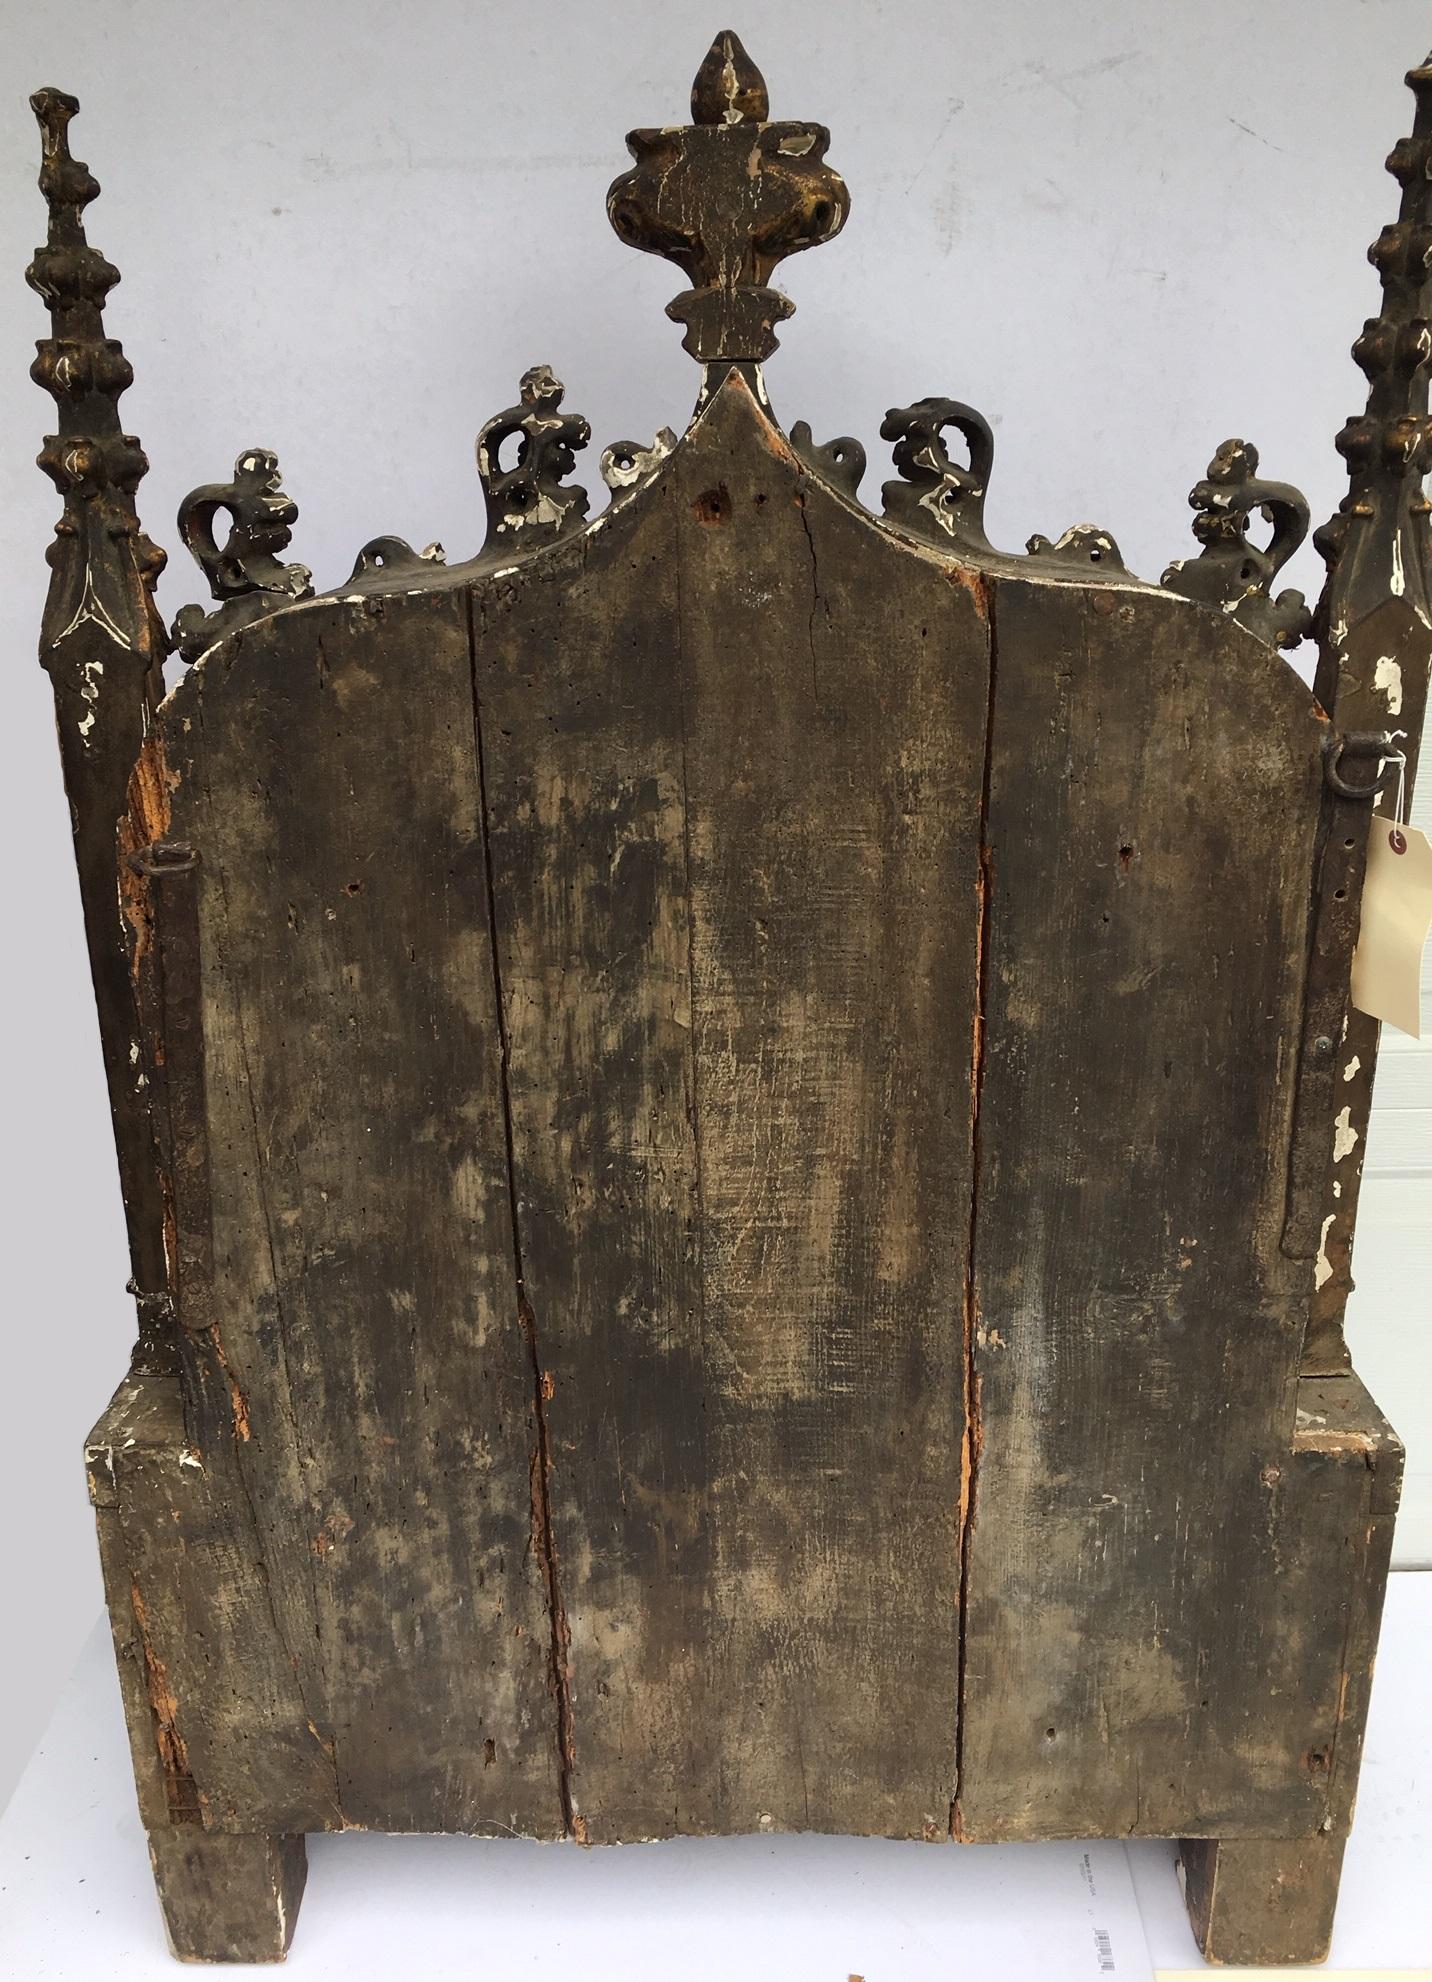 15th C Gothic Tabernacle 4 ft.+ Rare Architectural Religious Art, Museum Quality For Sale 5